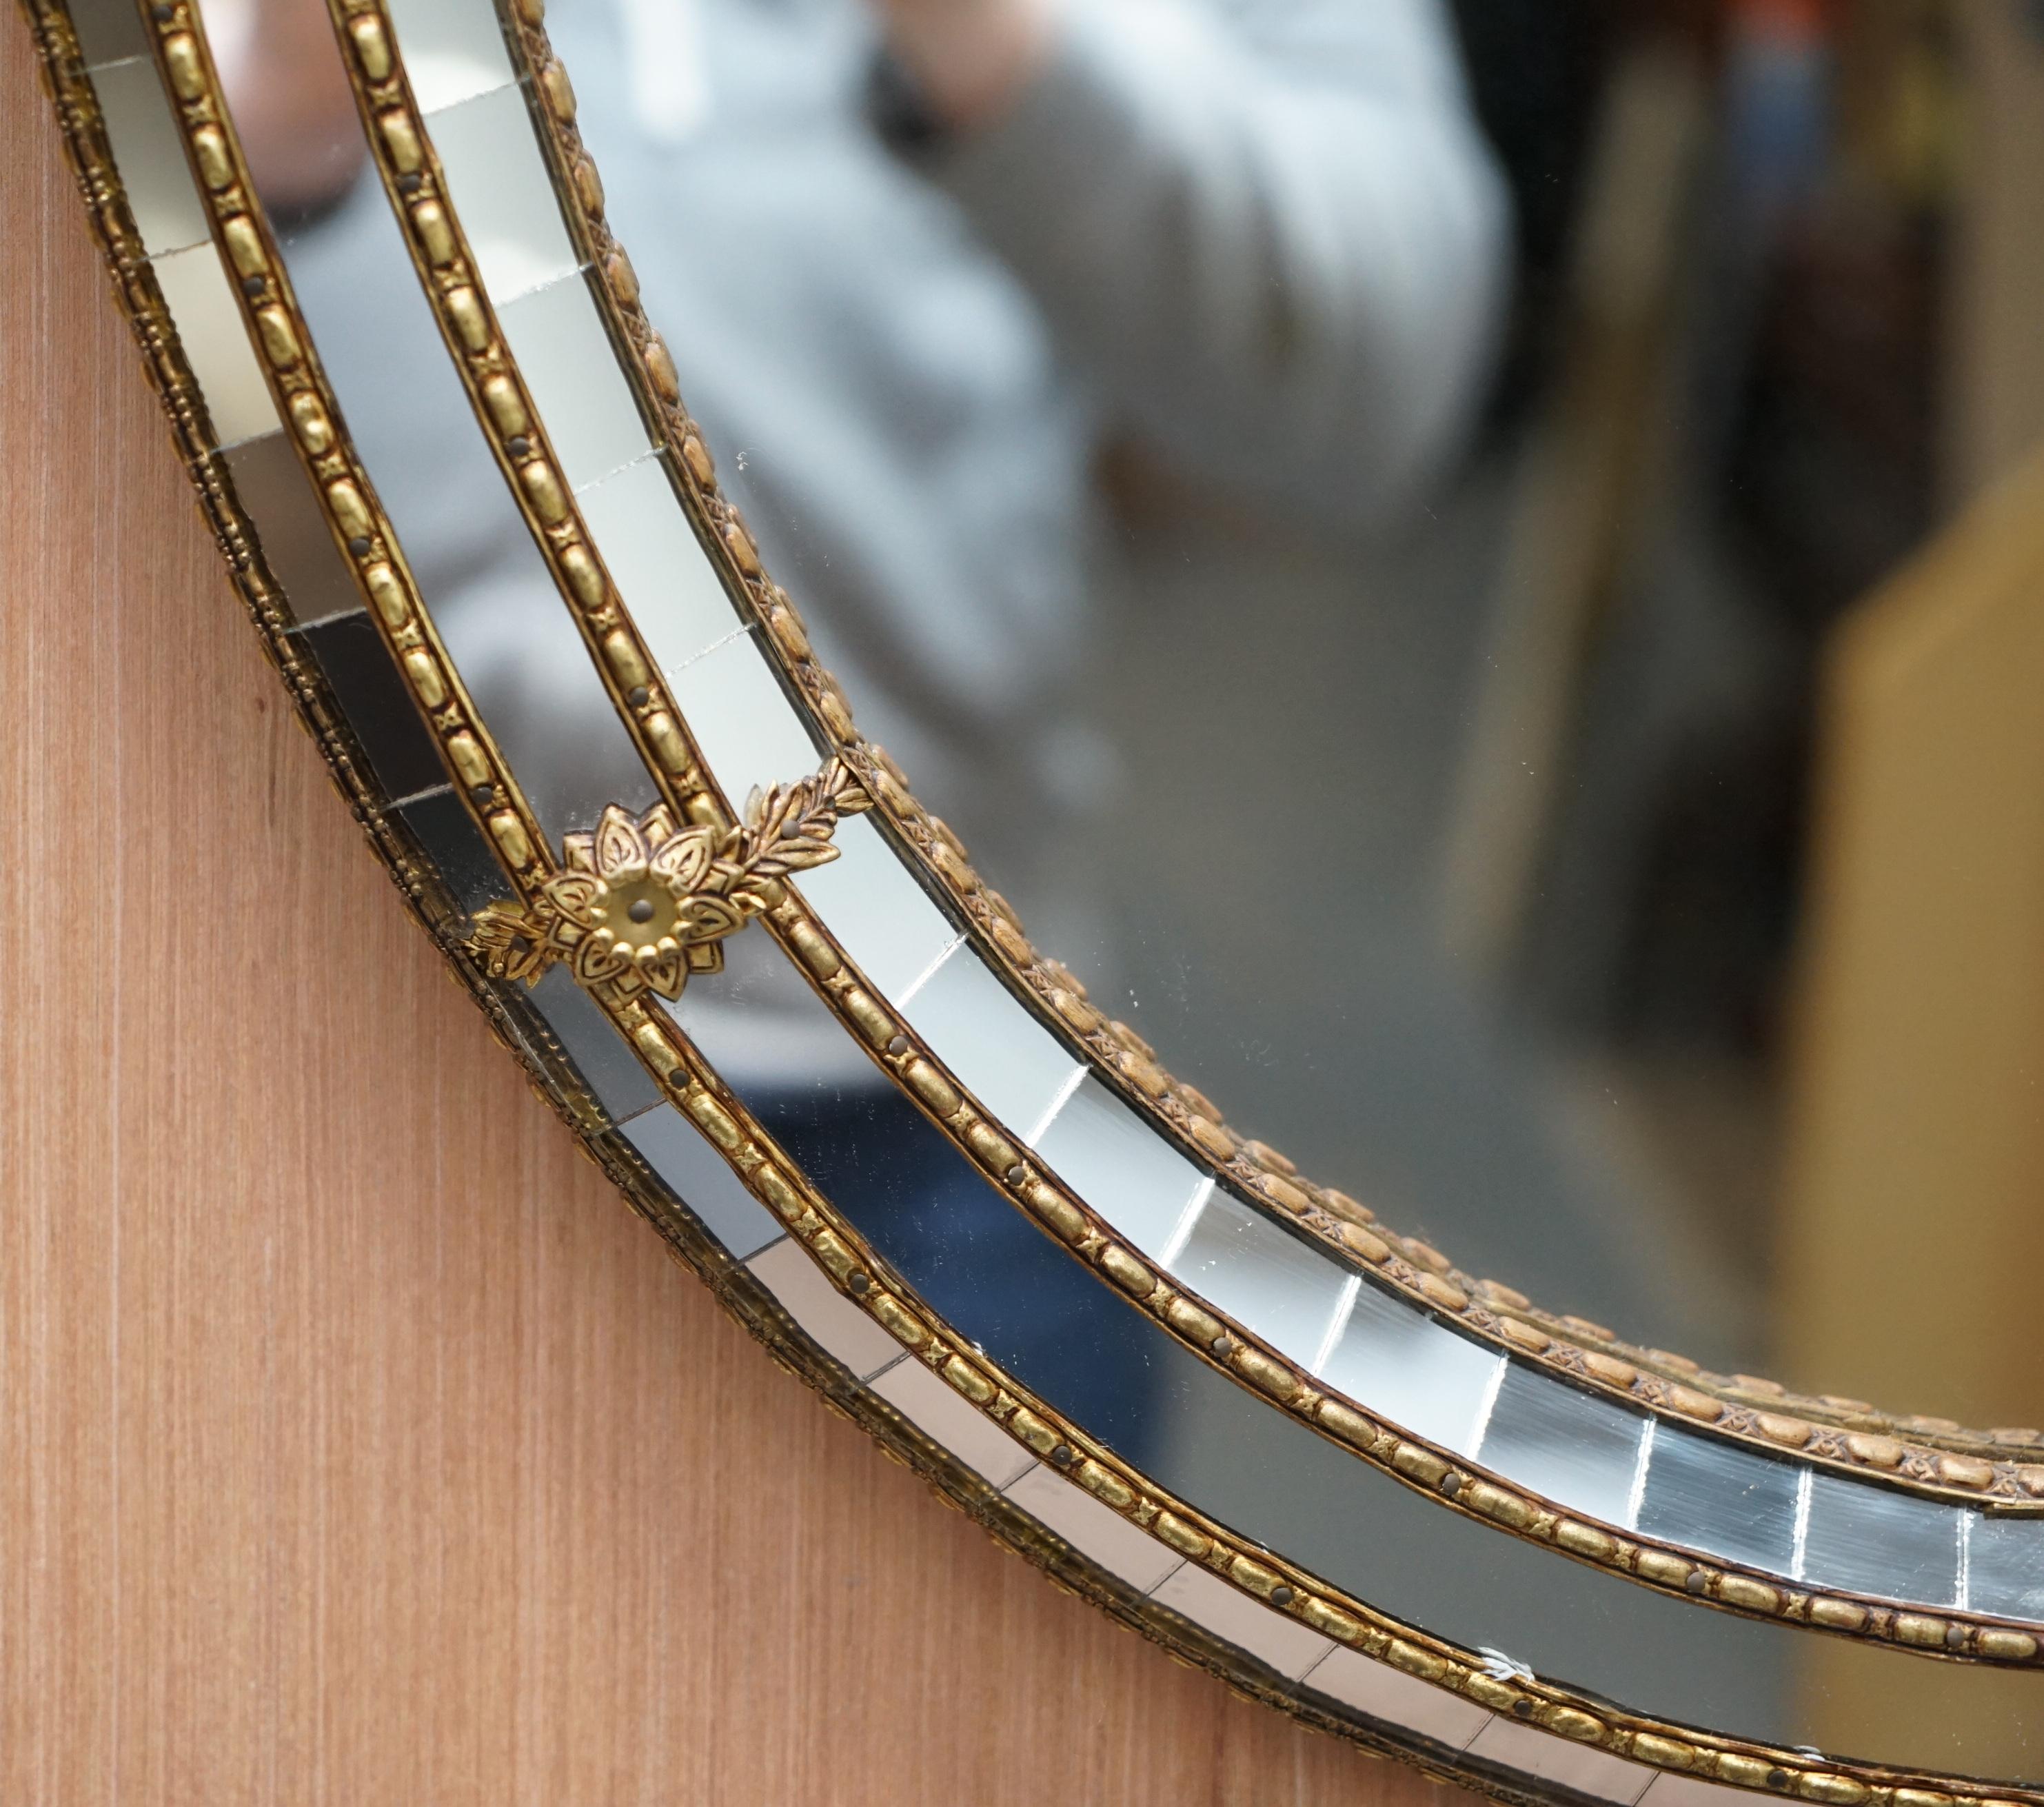 Stunning Venetian Oval Mirror with Mosaic Mirror Tiles and Tripled Edged Boarder 3